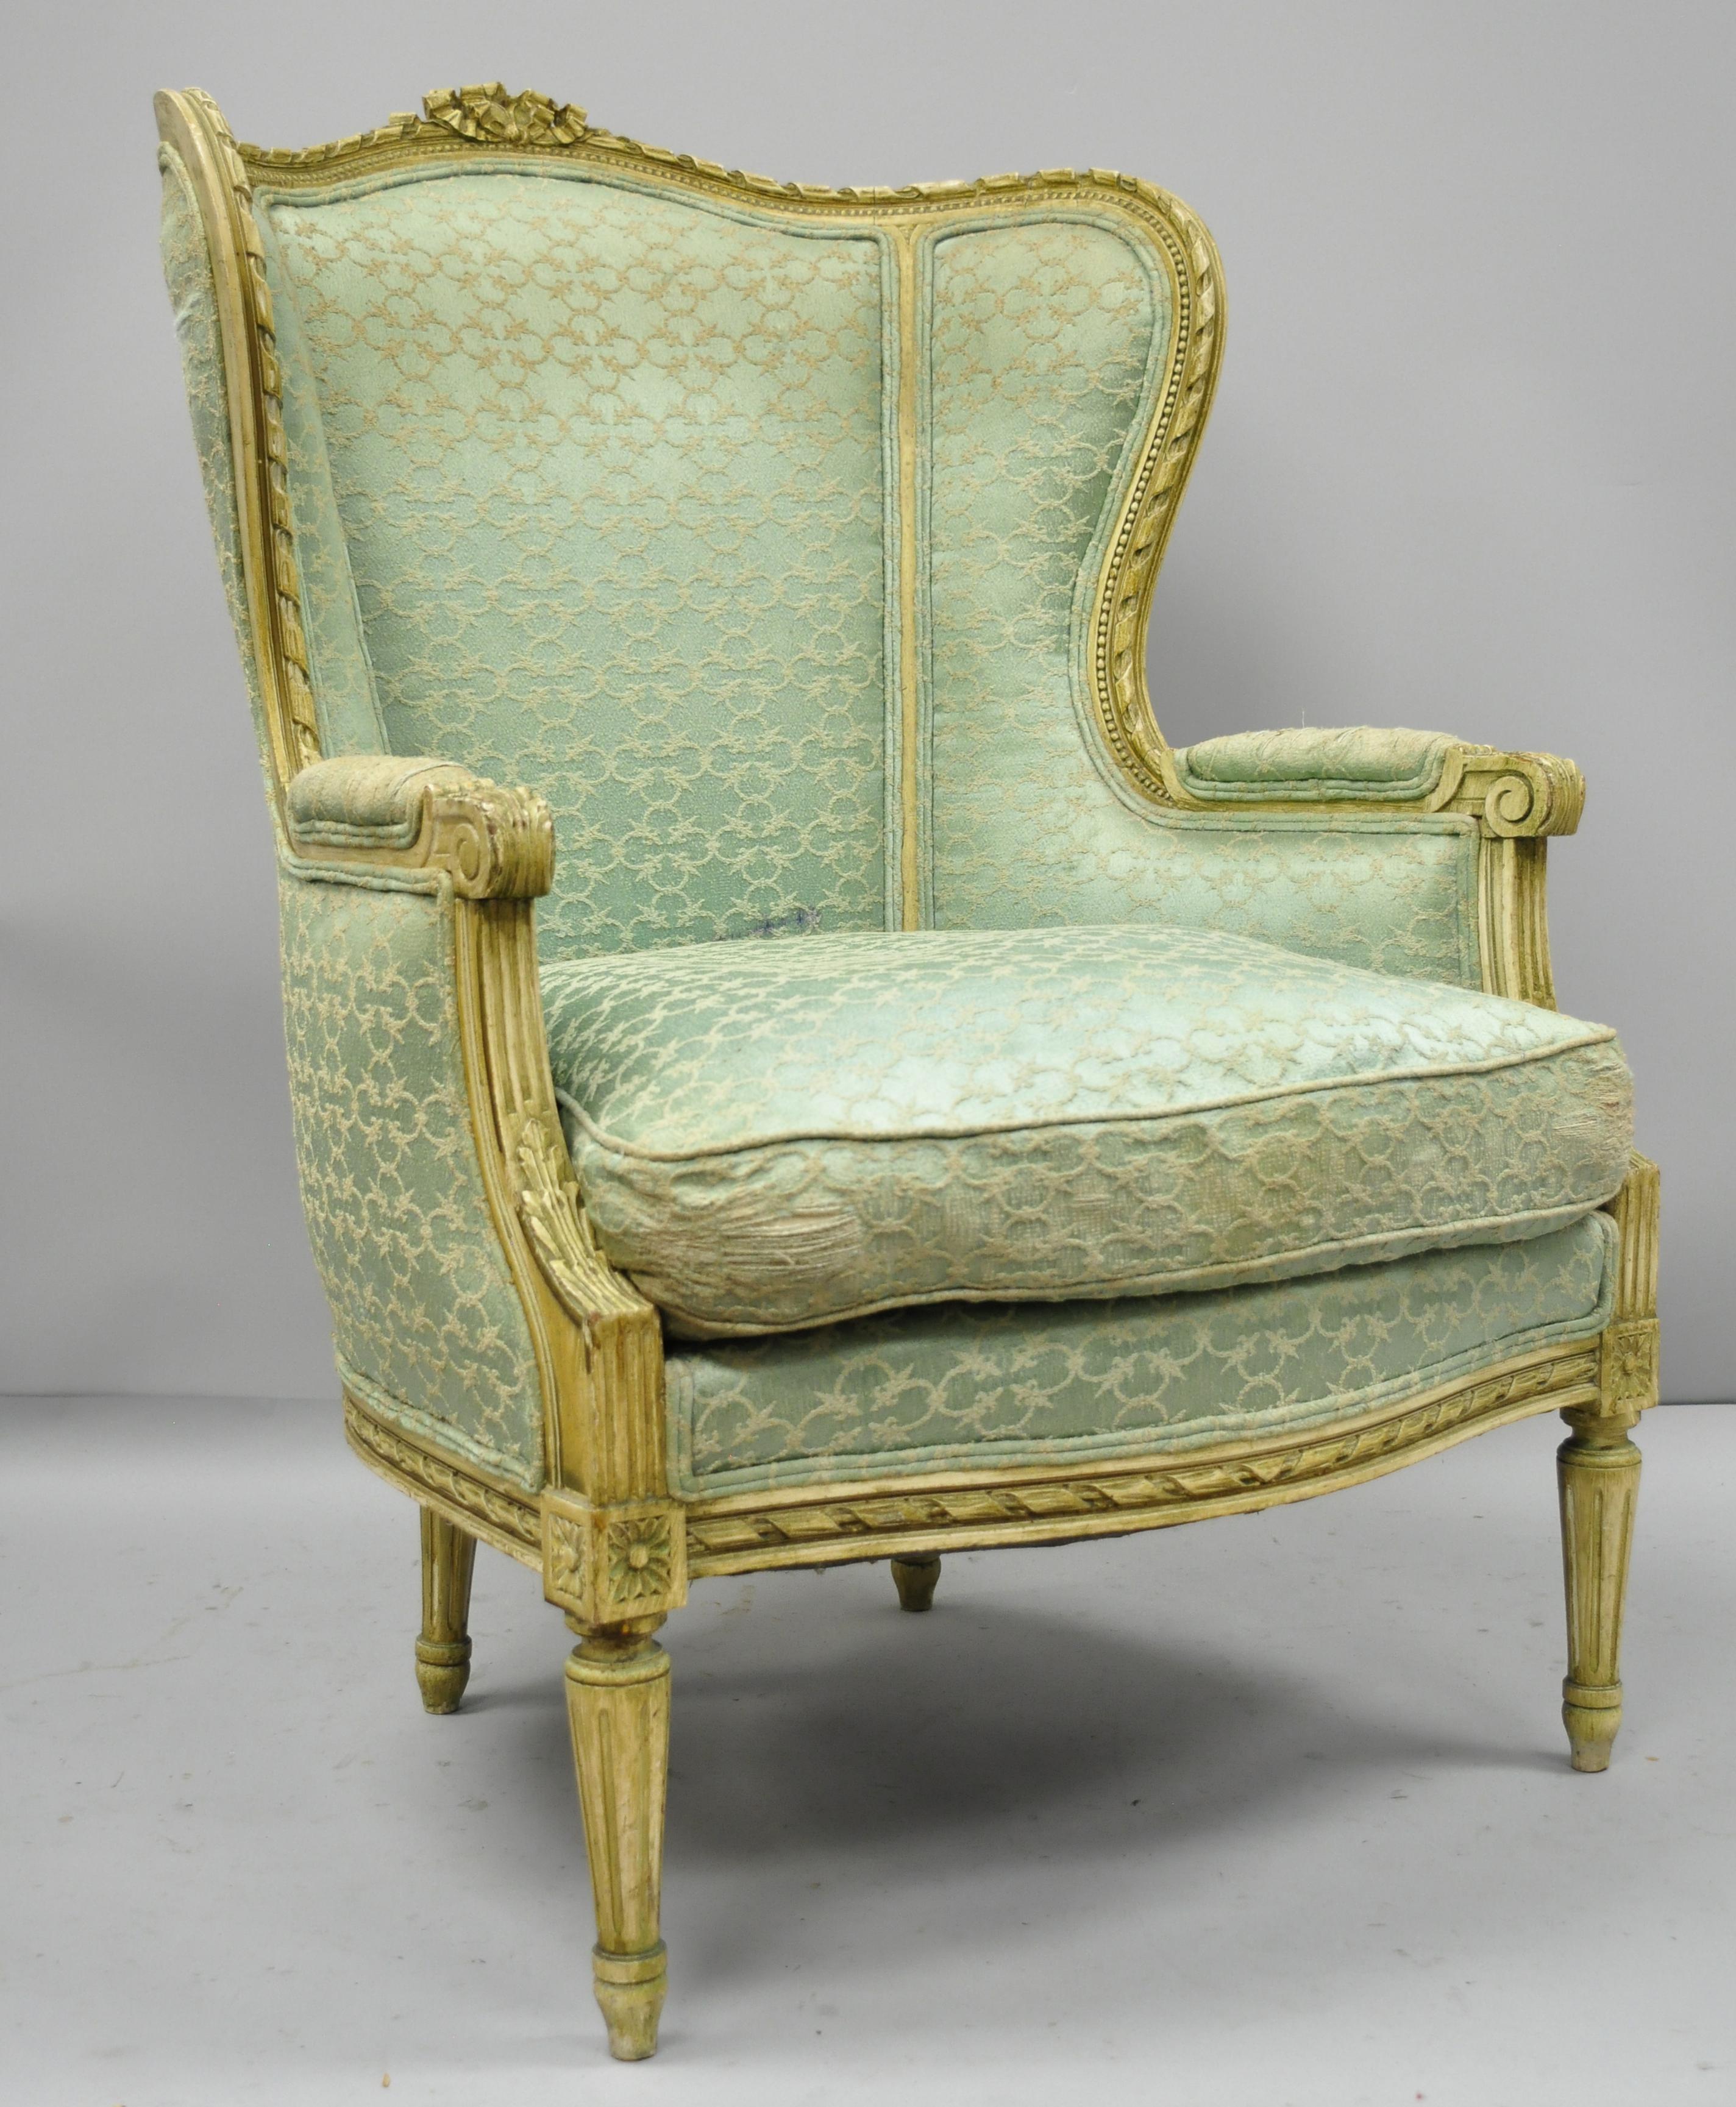 Antique French Louis XVI distress painted cream armchair. Item features shapely wingback, finely carved frame, cream distressed finish, solid wood frame, and tapered legs, circa early 20th century. Measurements: 41.5